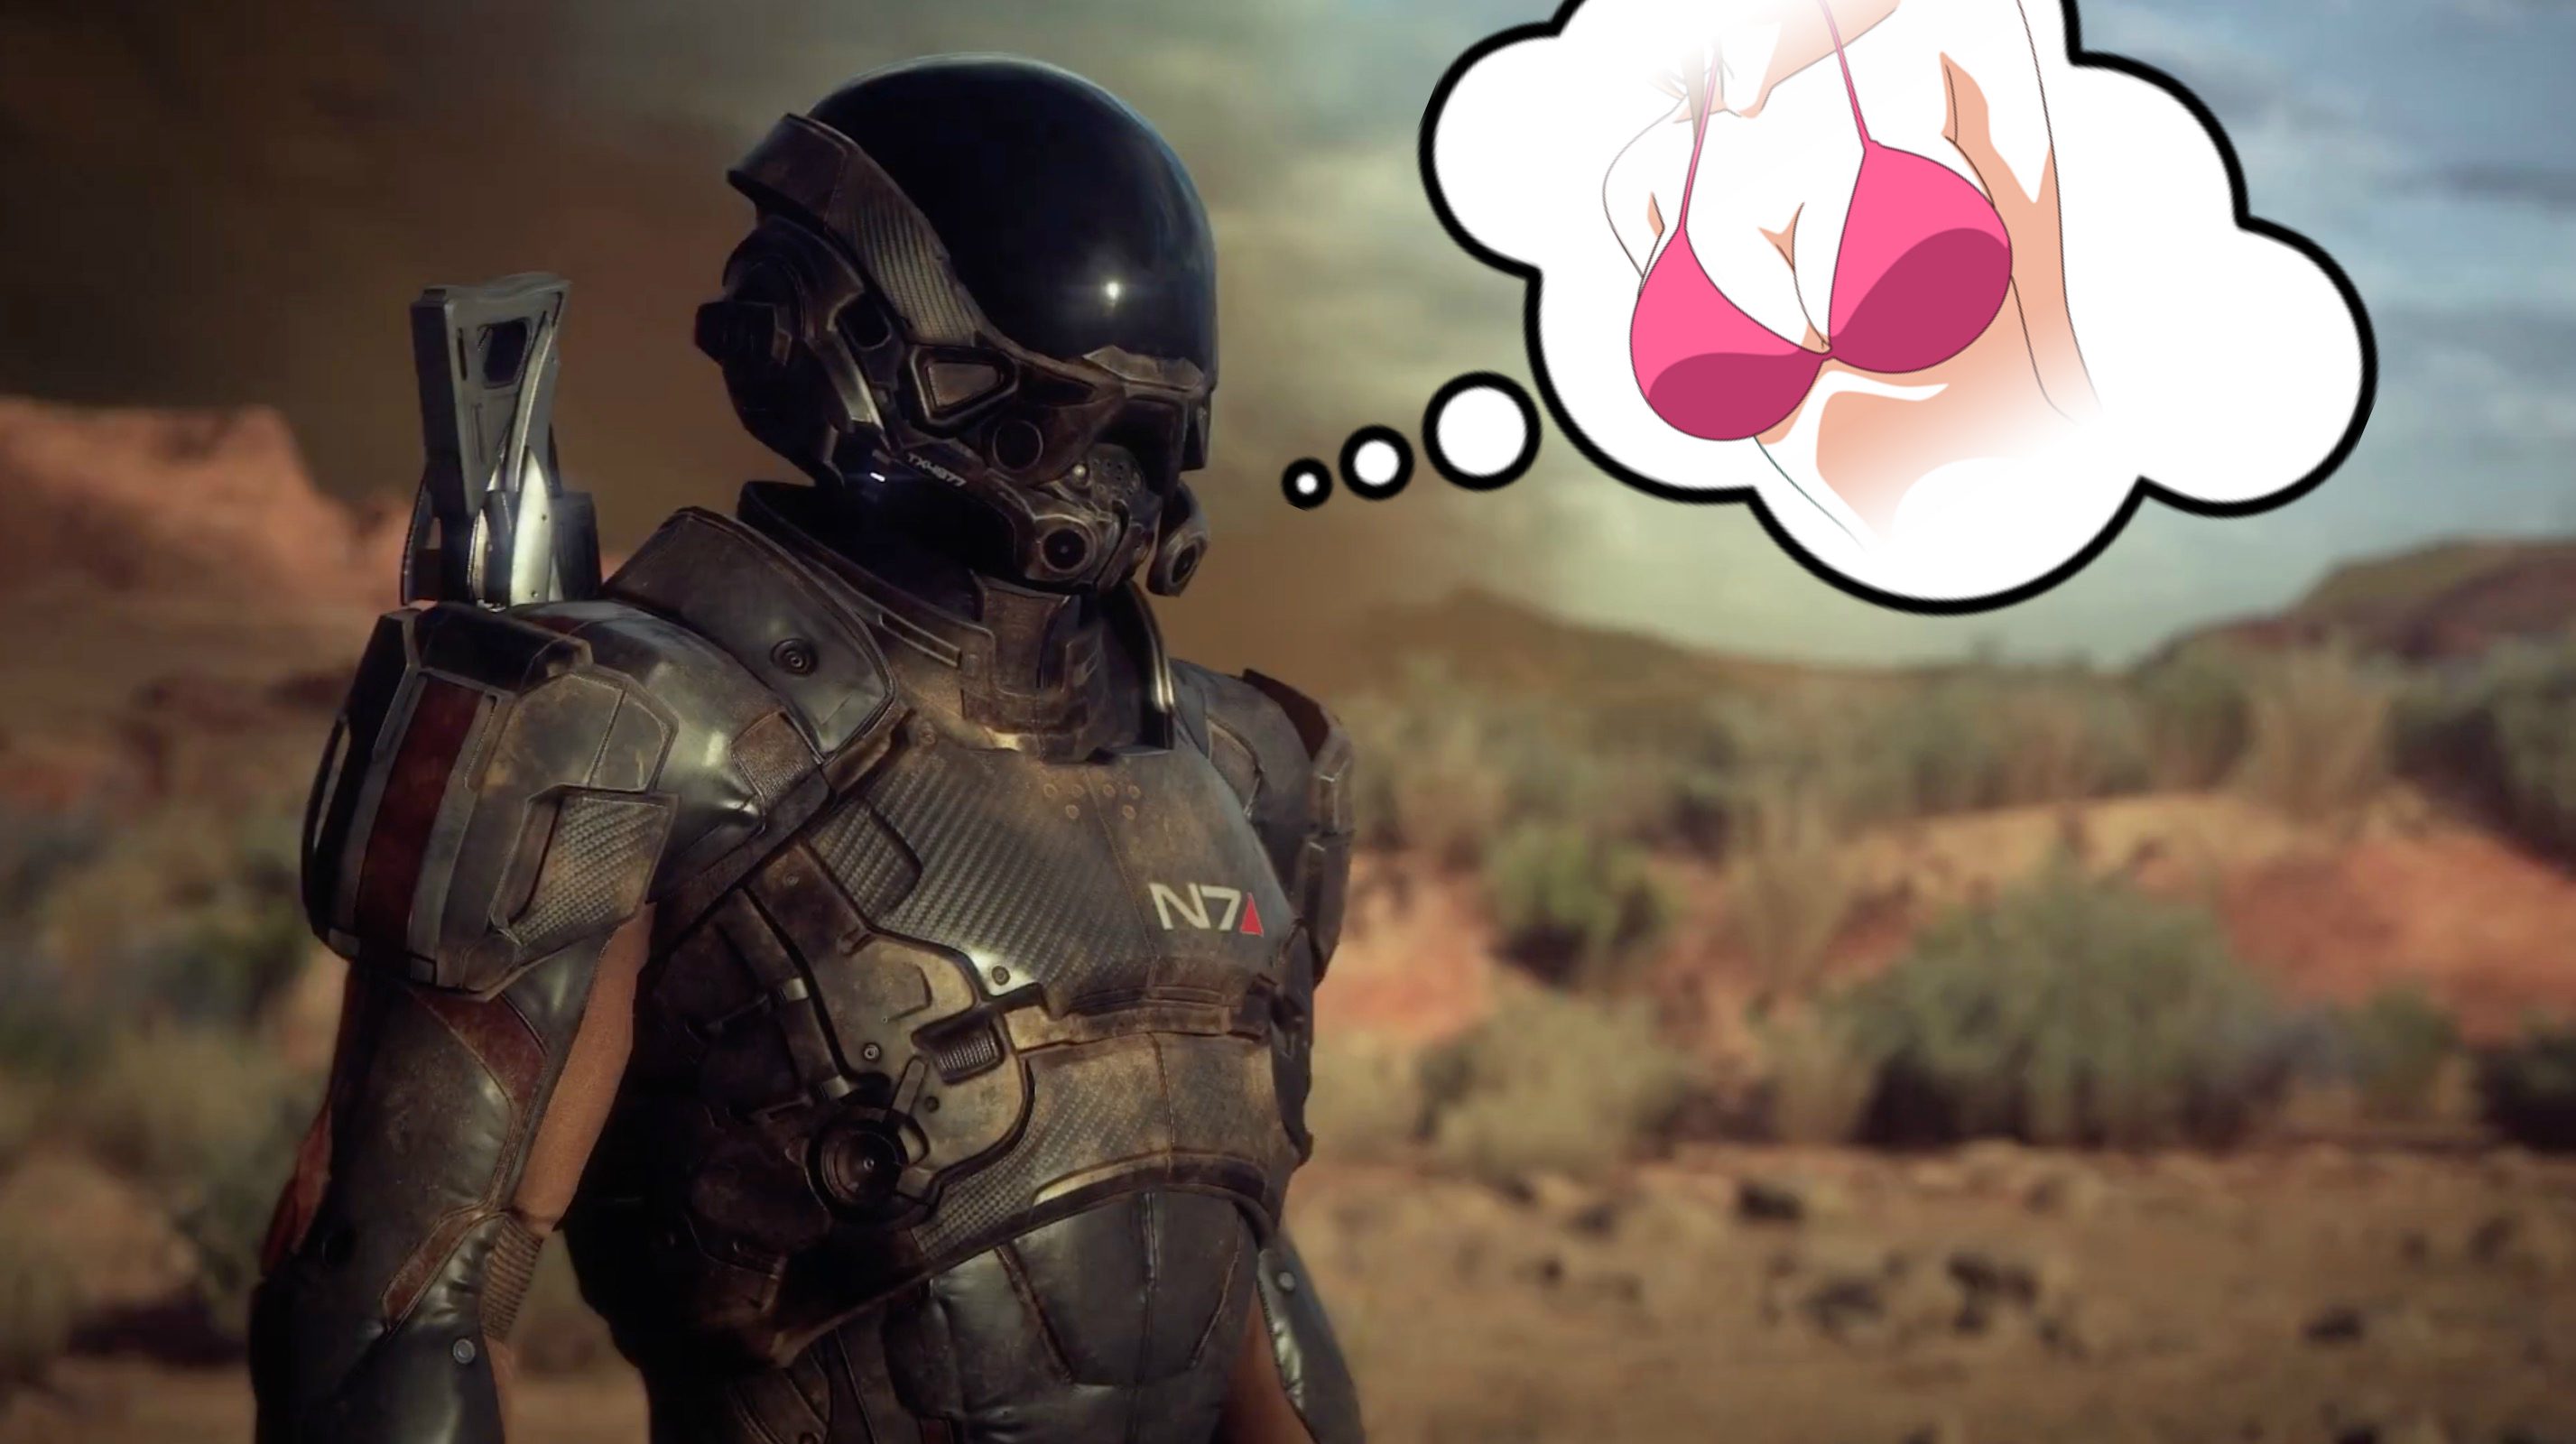 Mass Effect: Andromeda producer says the “banging” will be “pretty good” in the game